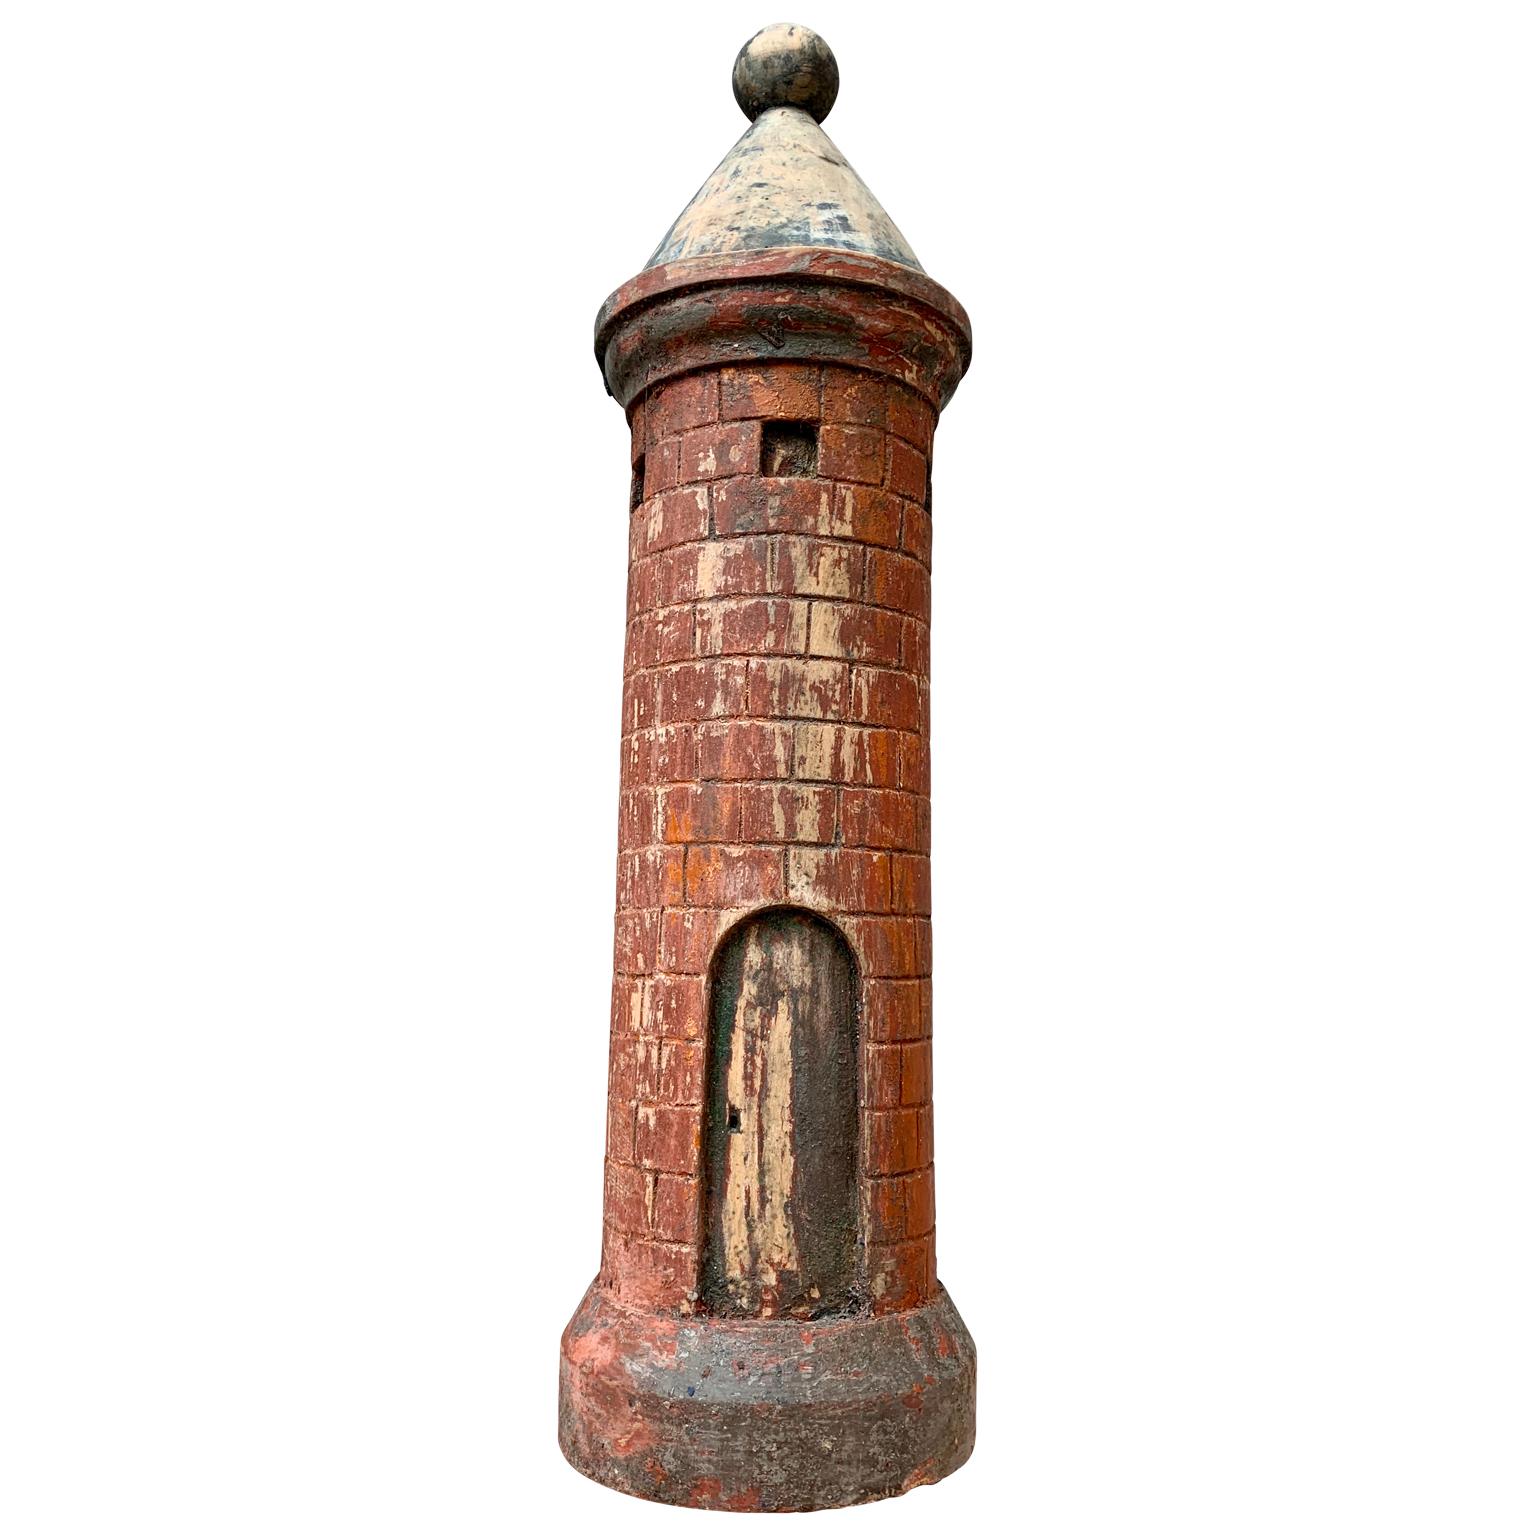 An early 19th century hand carved and painted sculpture of a medieval tower in wood.